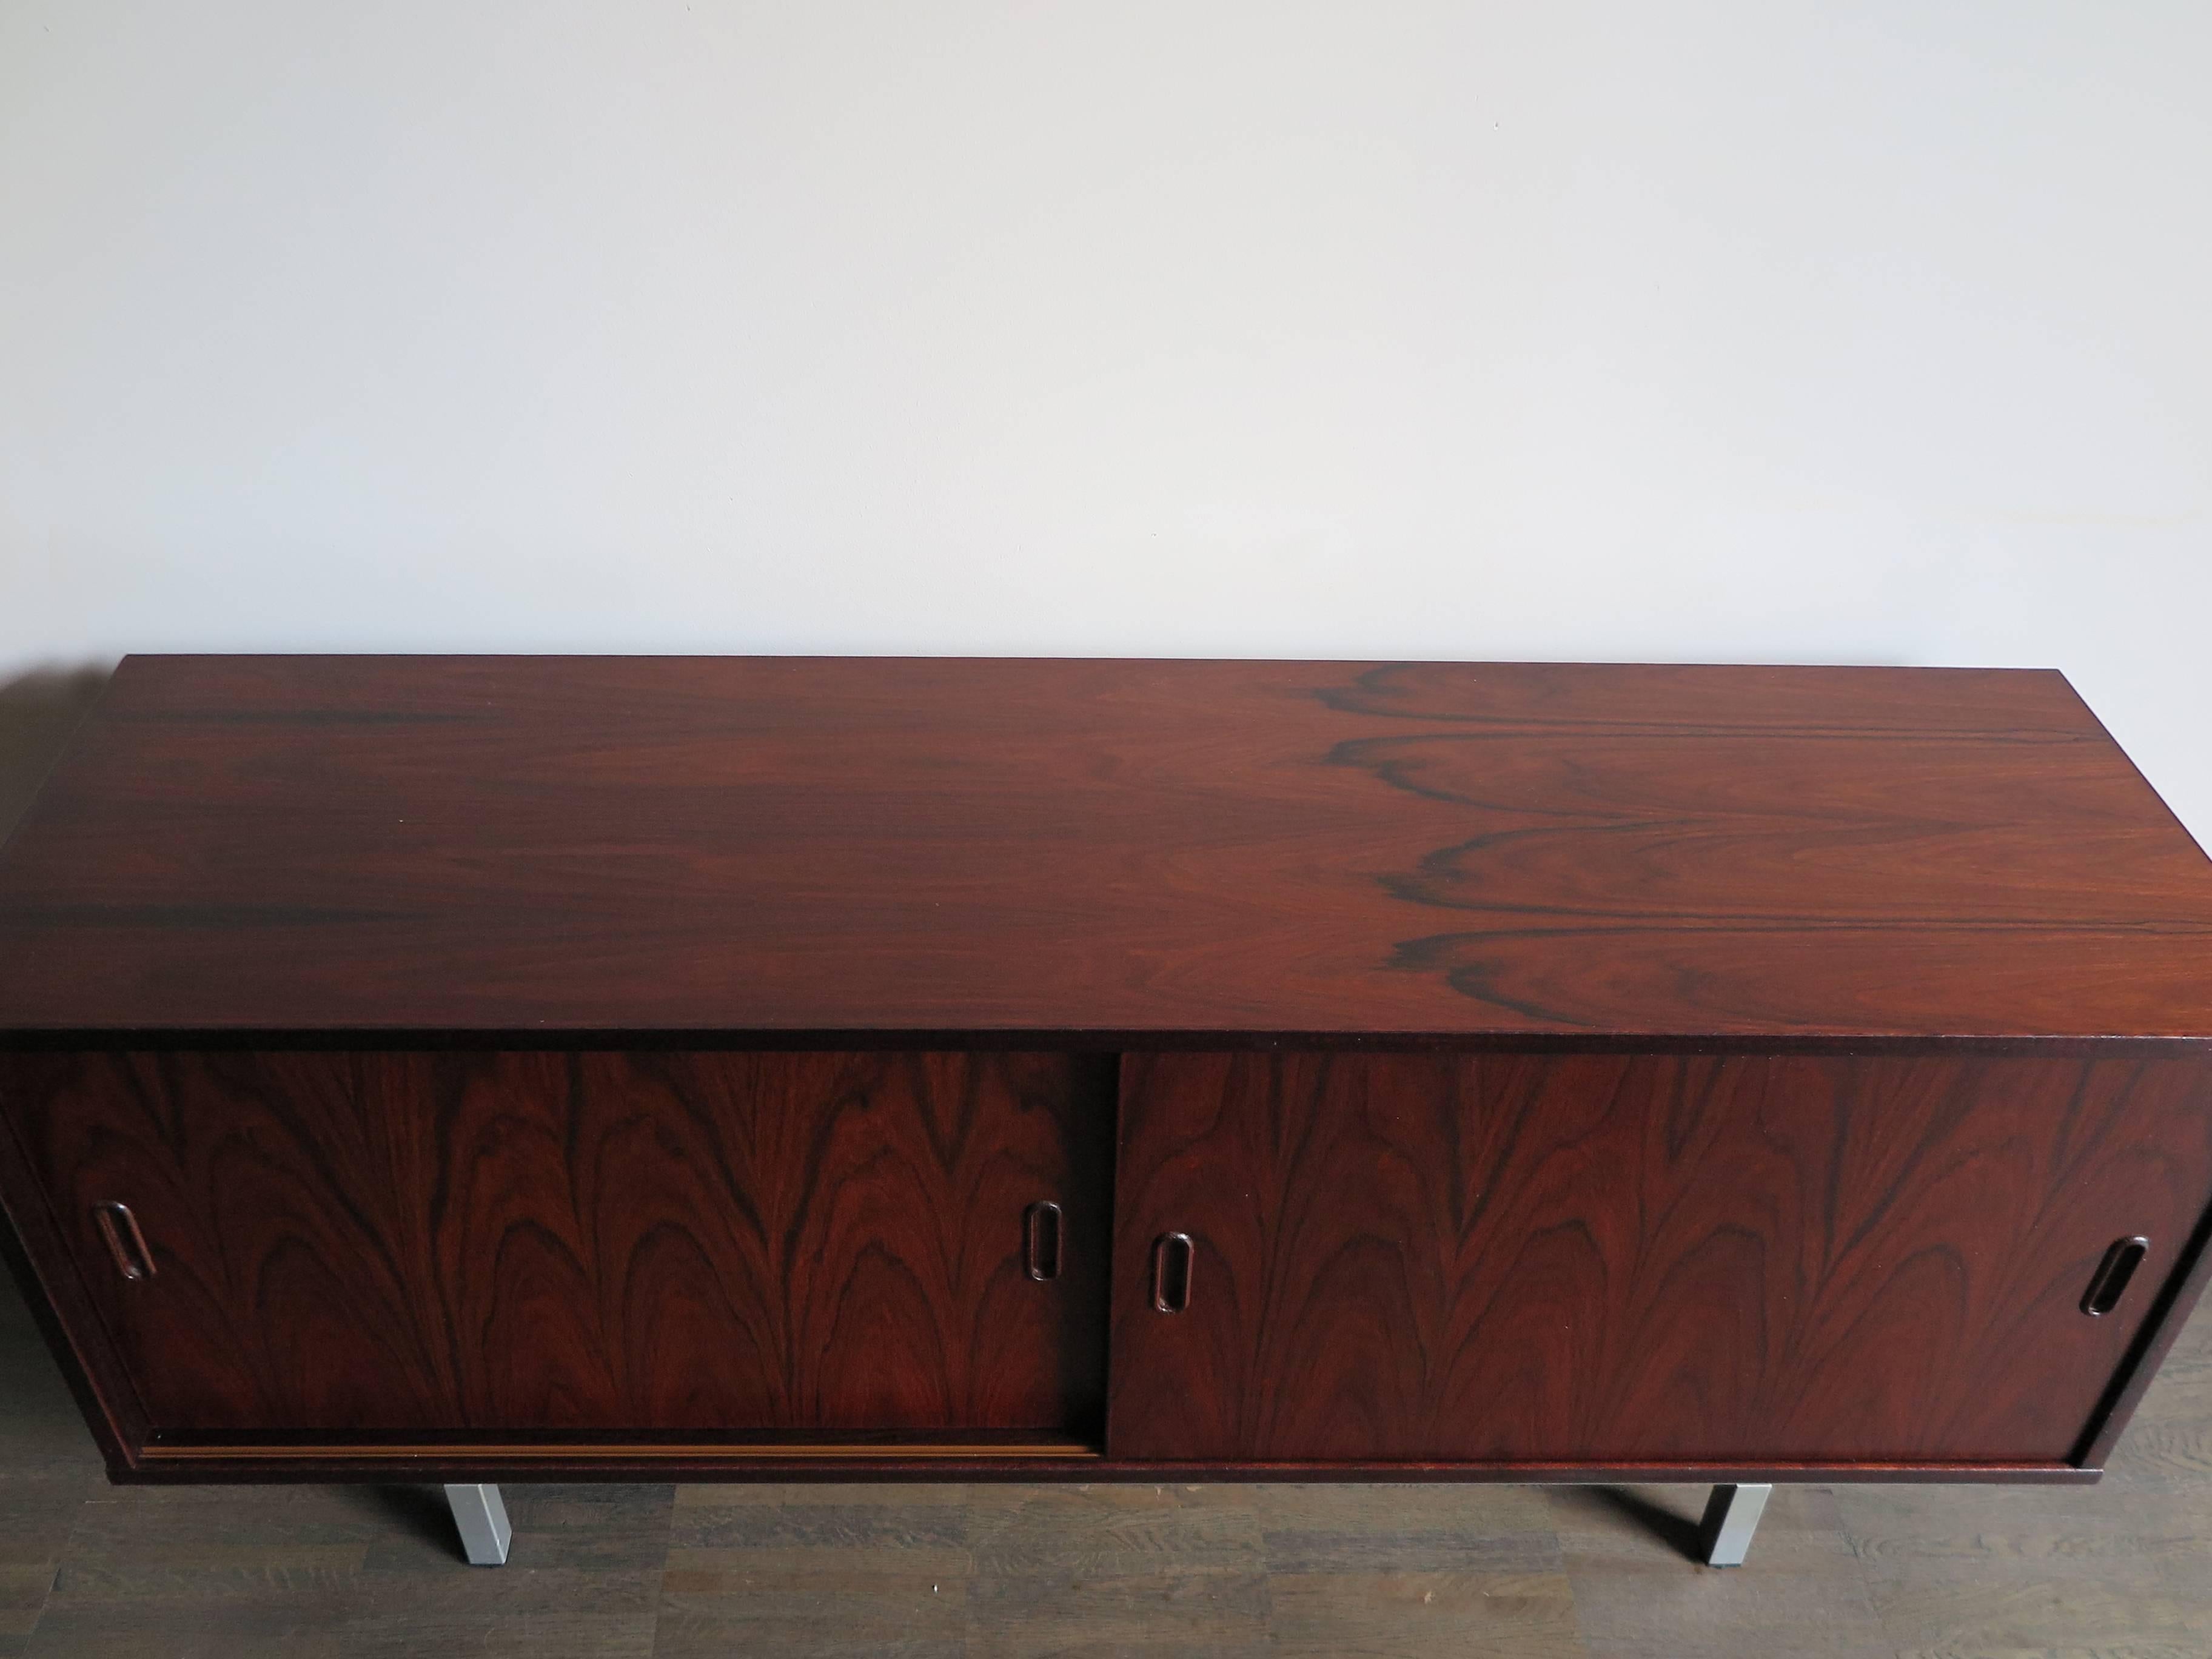 1960s Danish Mid-Century Modern rosewood sideboard with two sliding doors and metal legs.